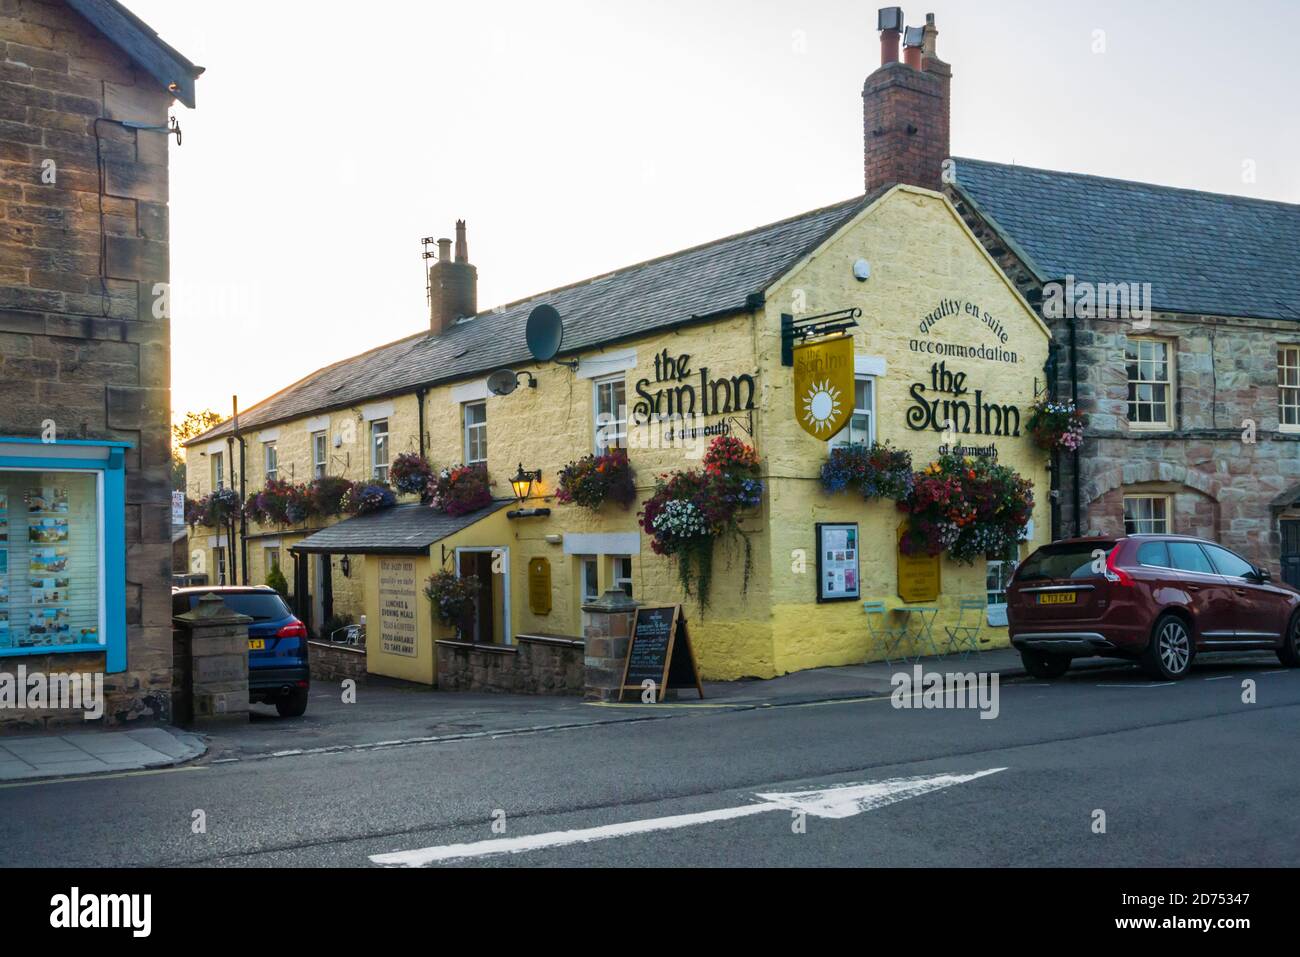 'The Sun Inn' Public House a Alnmouth, Northumberland Foto Stock